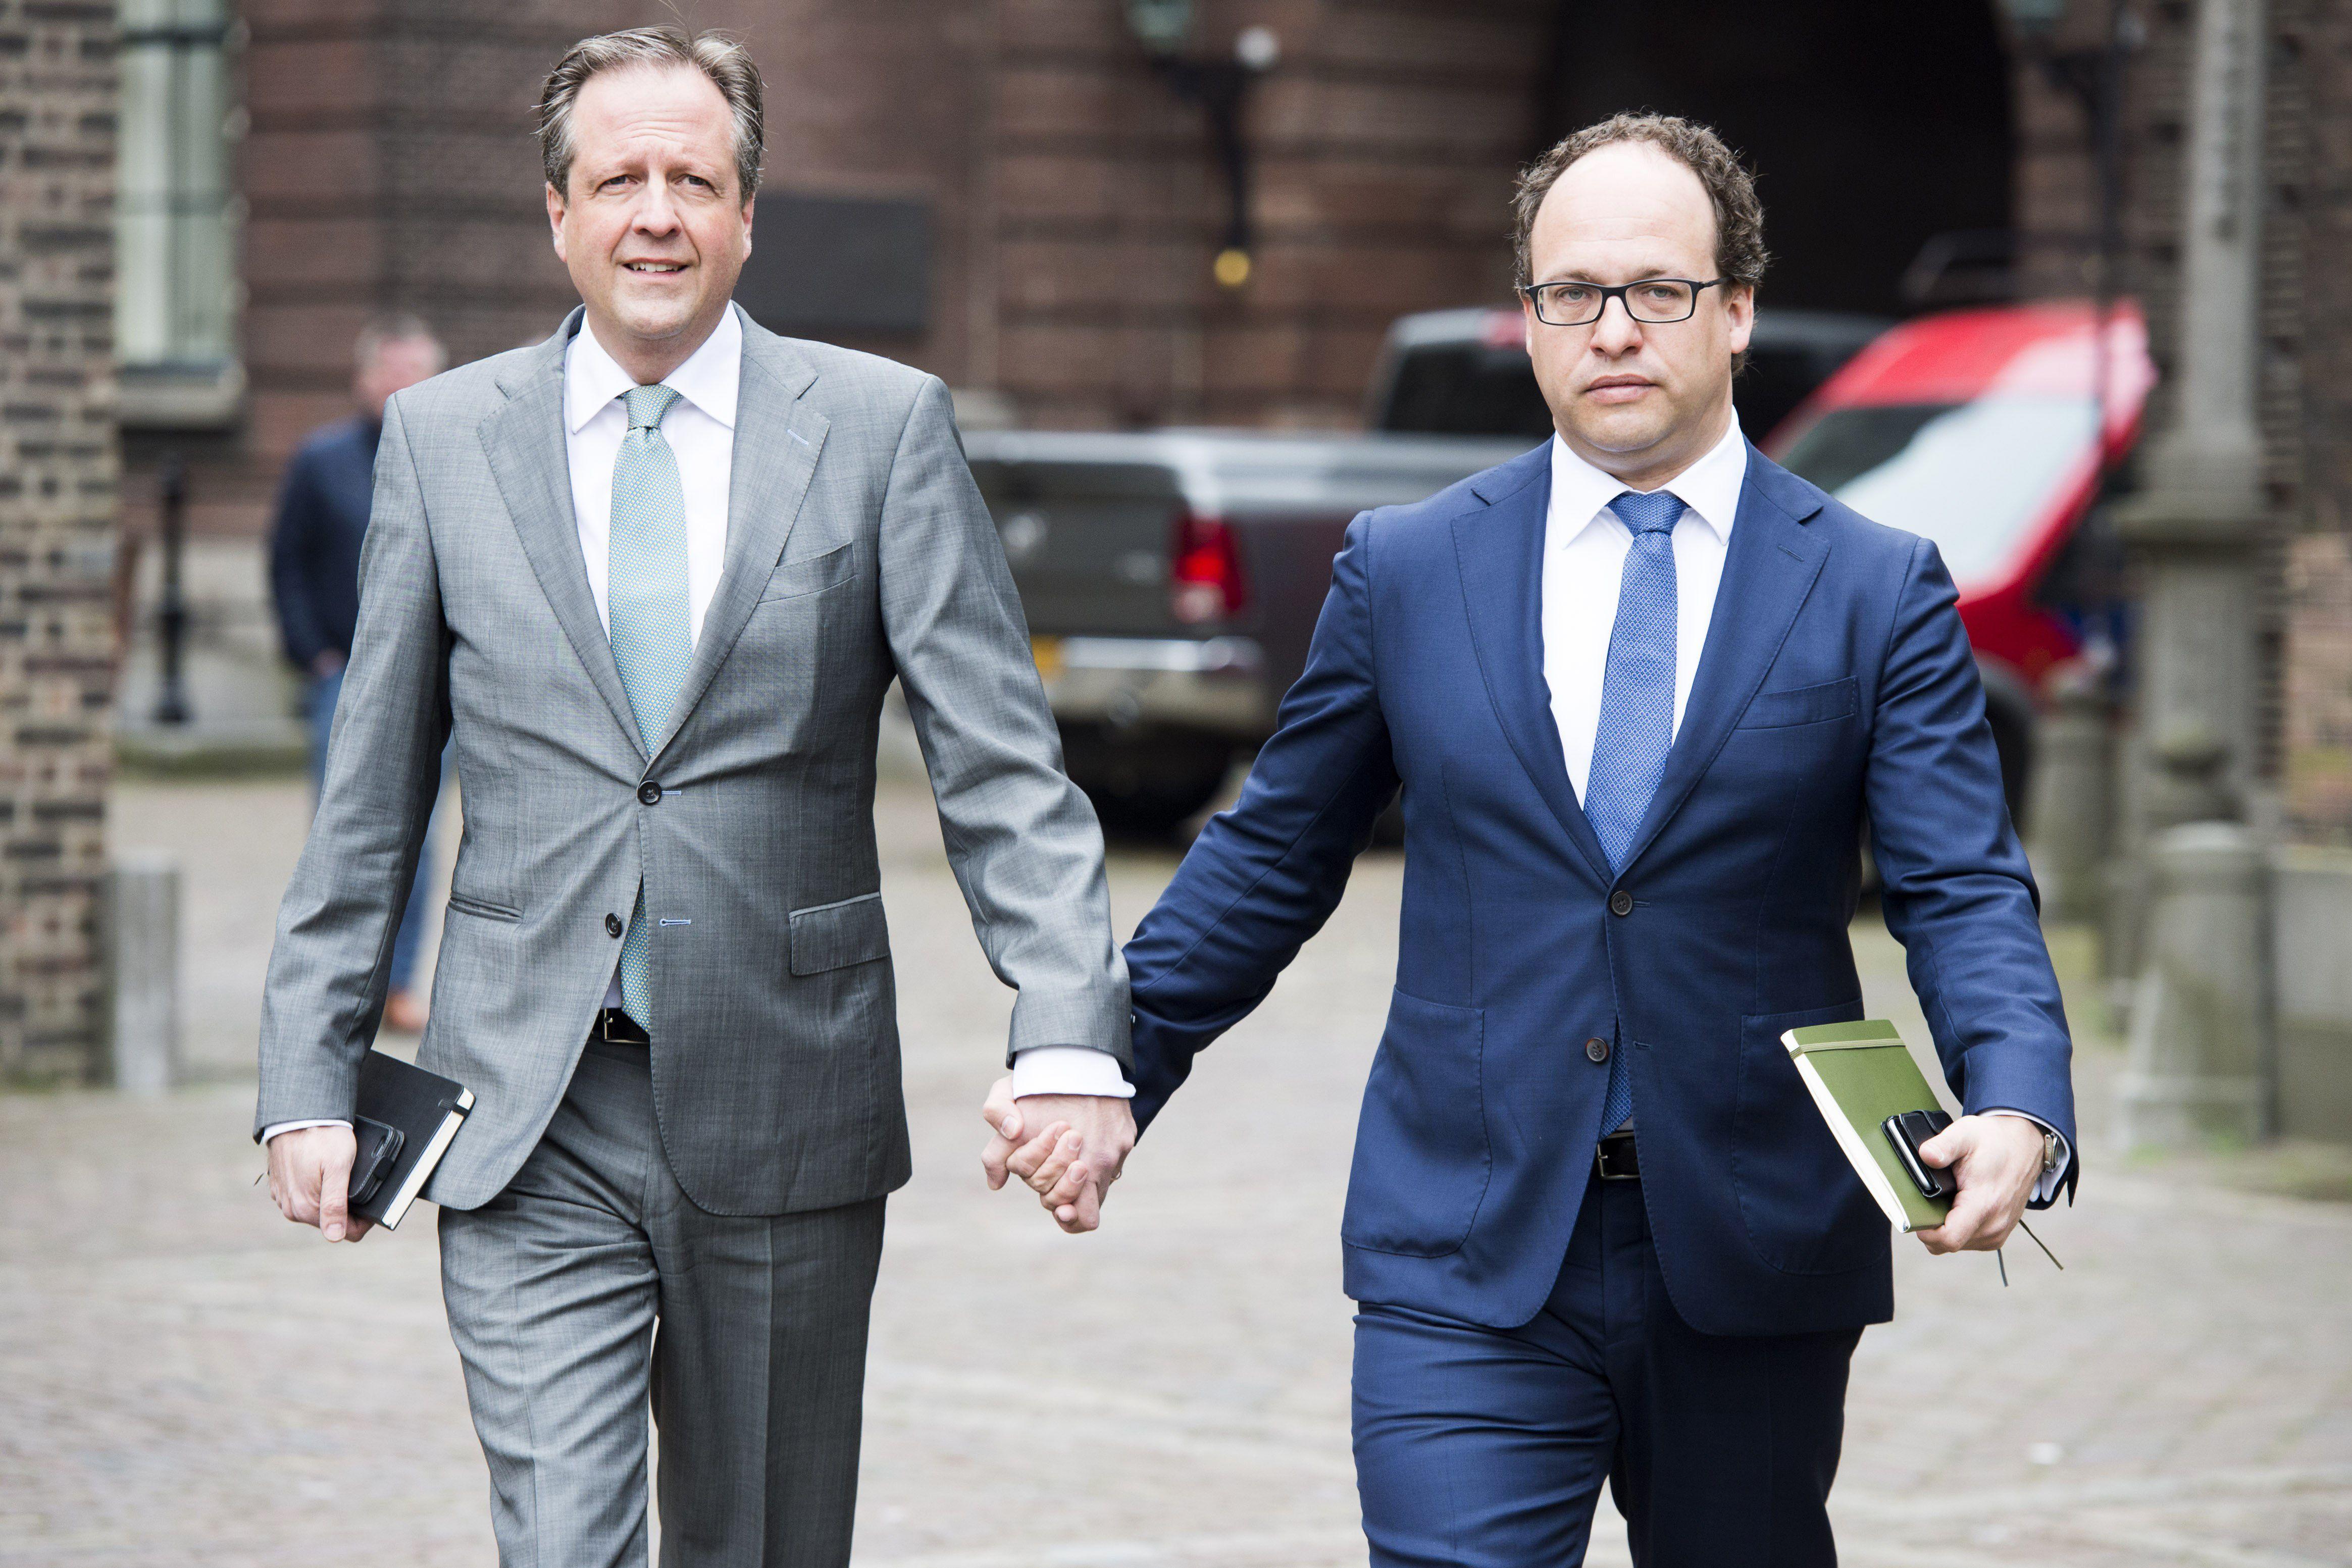 Dutch Men Across The World Hold Hands To Support Attacked Gay Couple